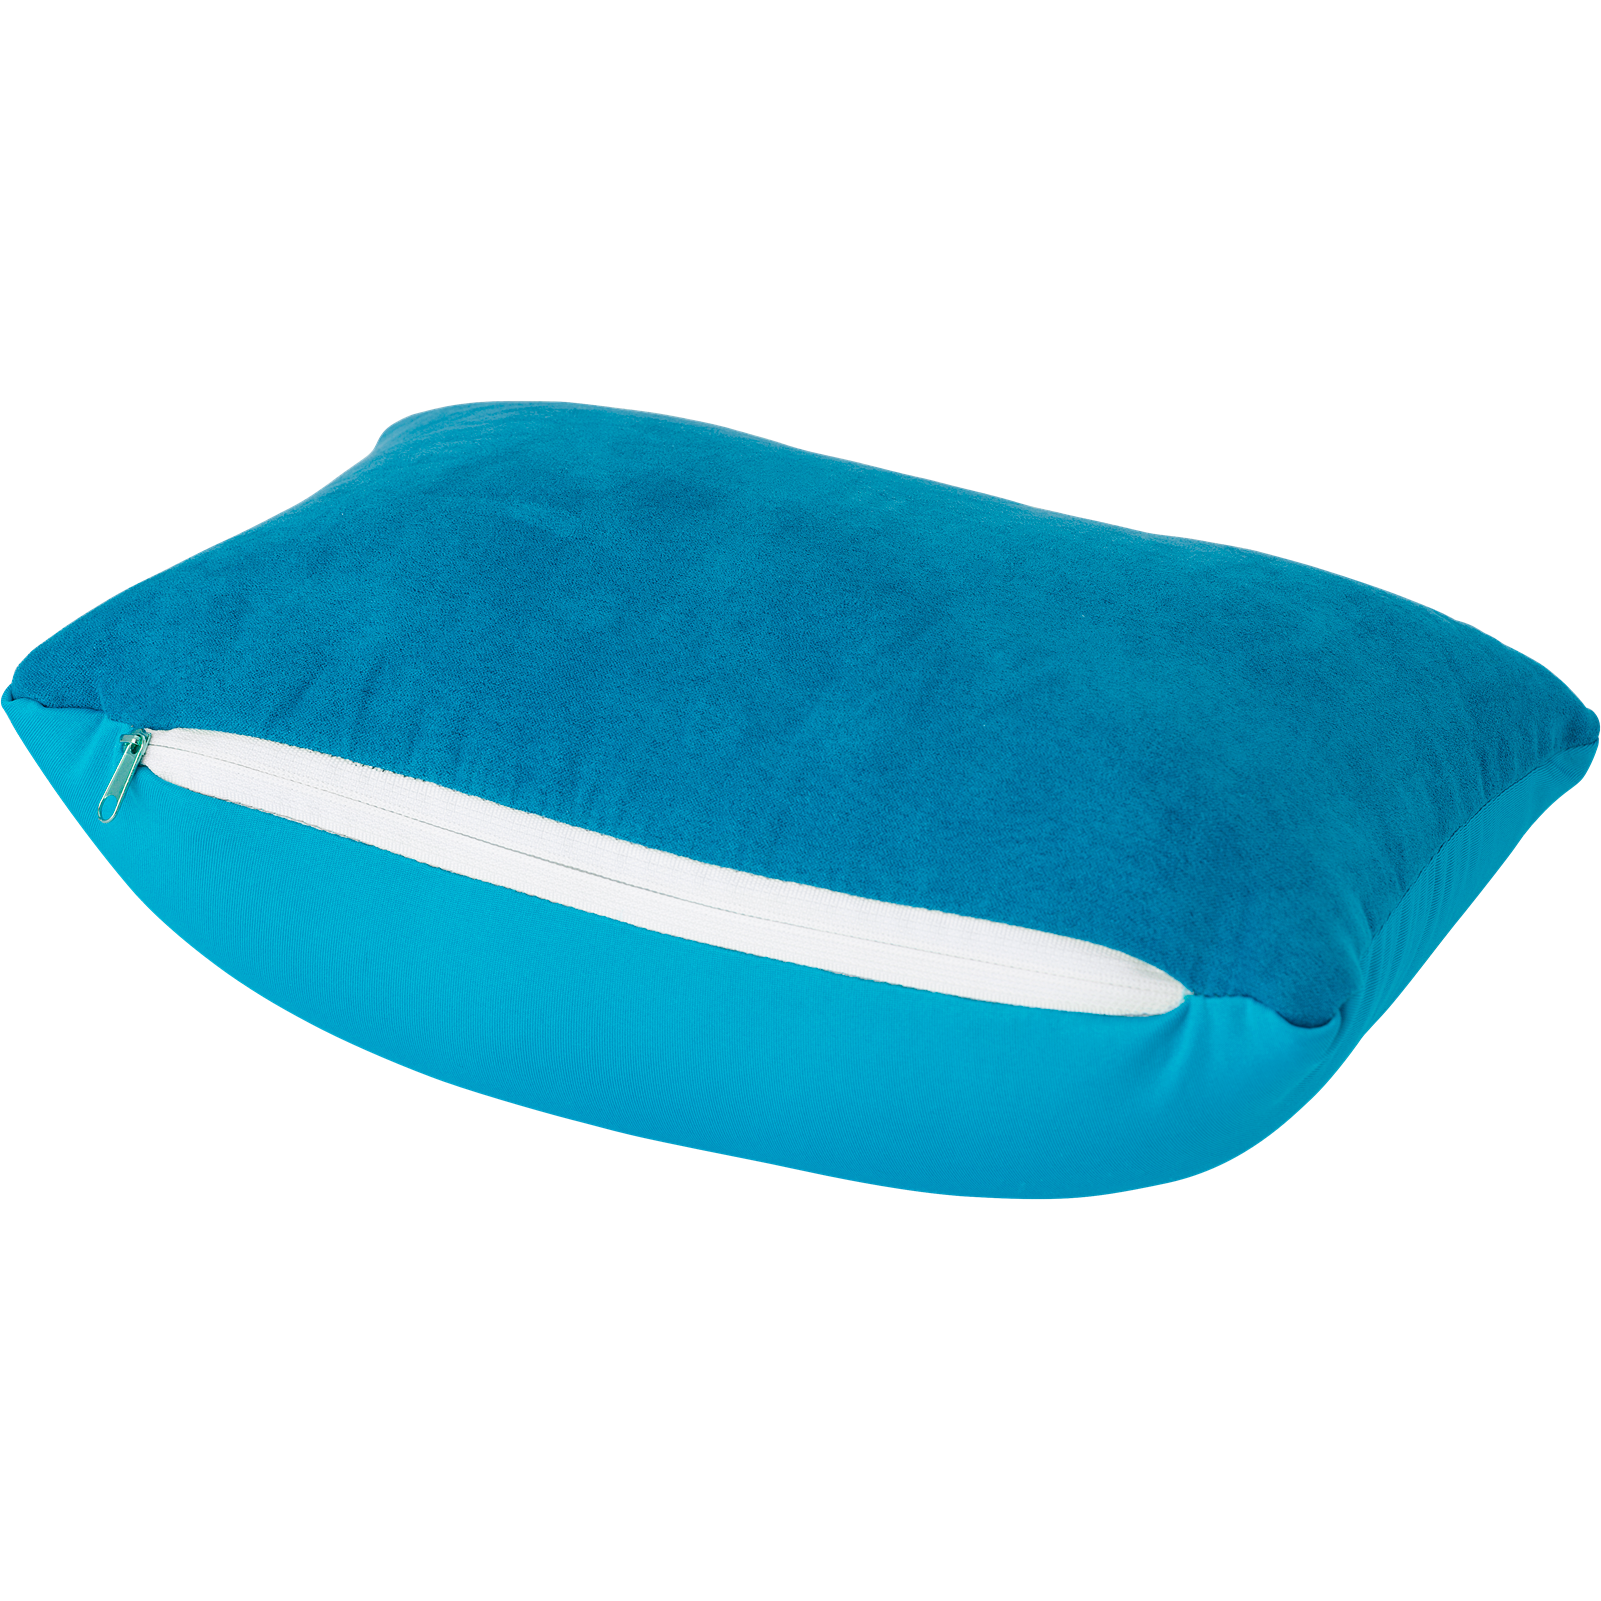 2-in-1 Travel Pillow Travel Accessories   